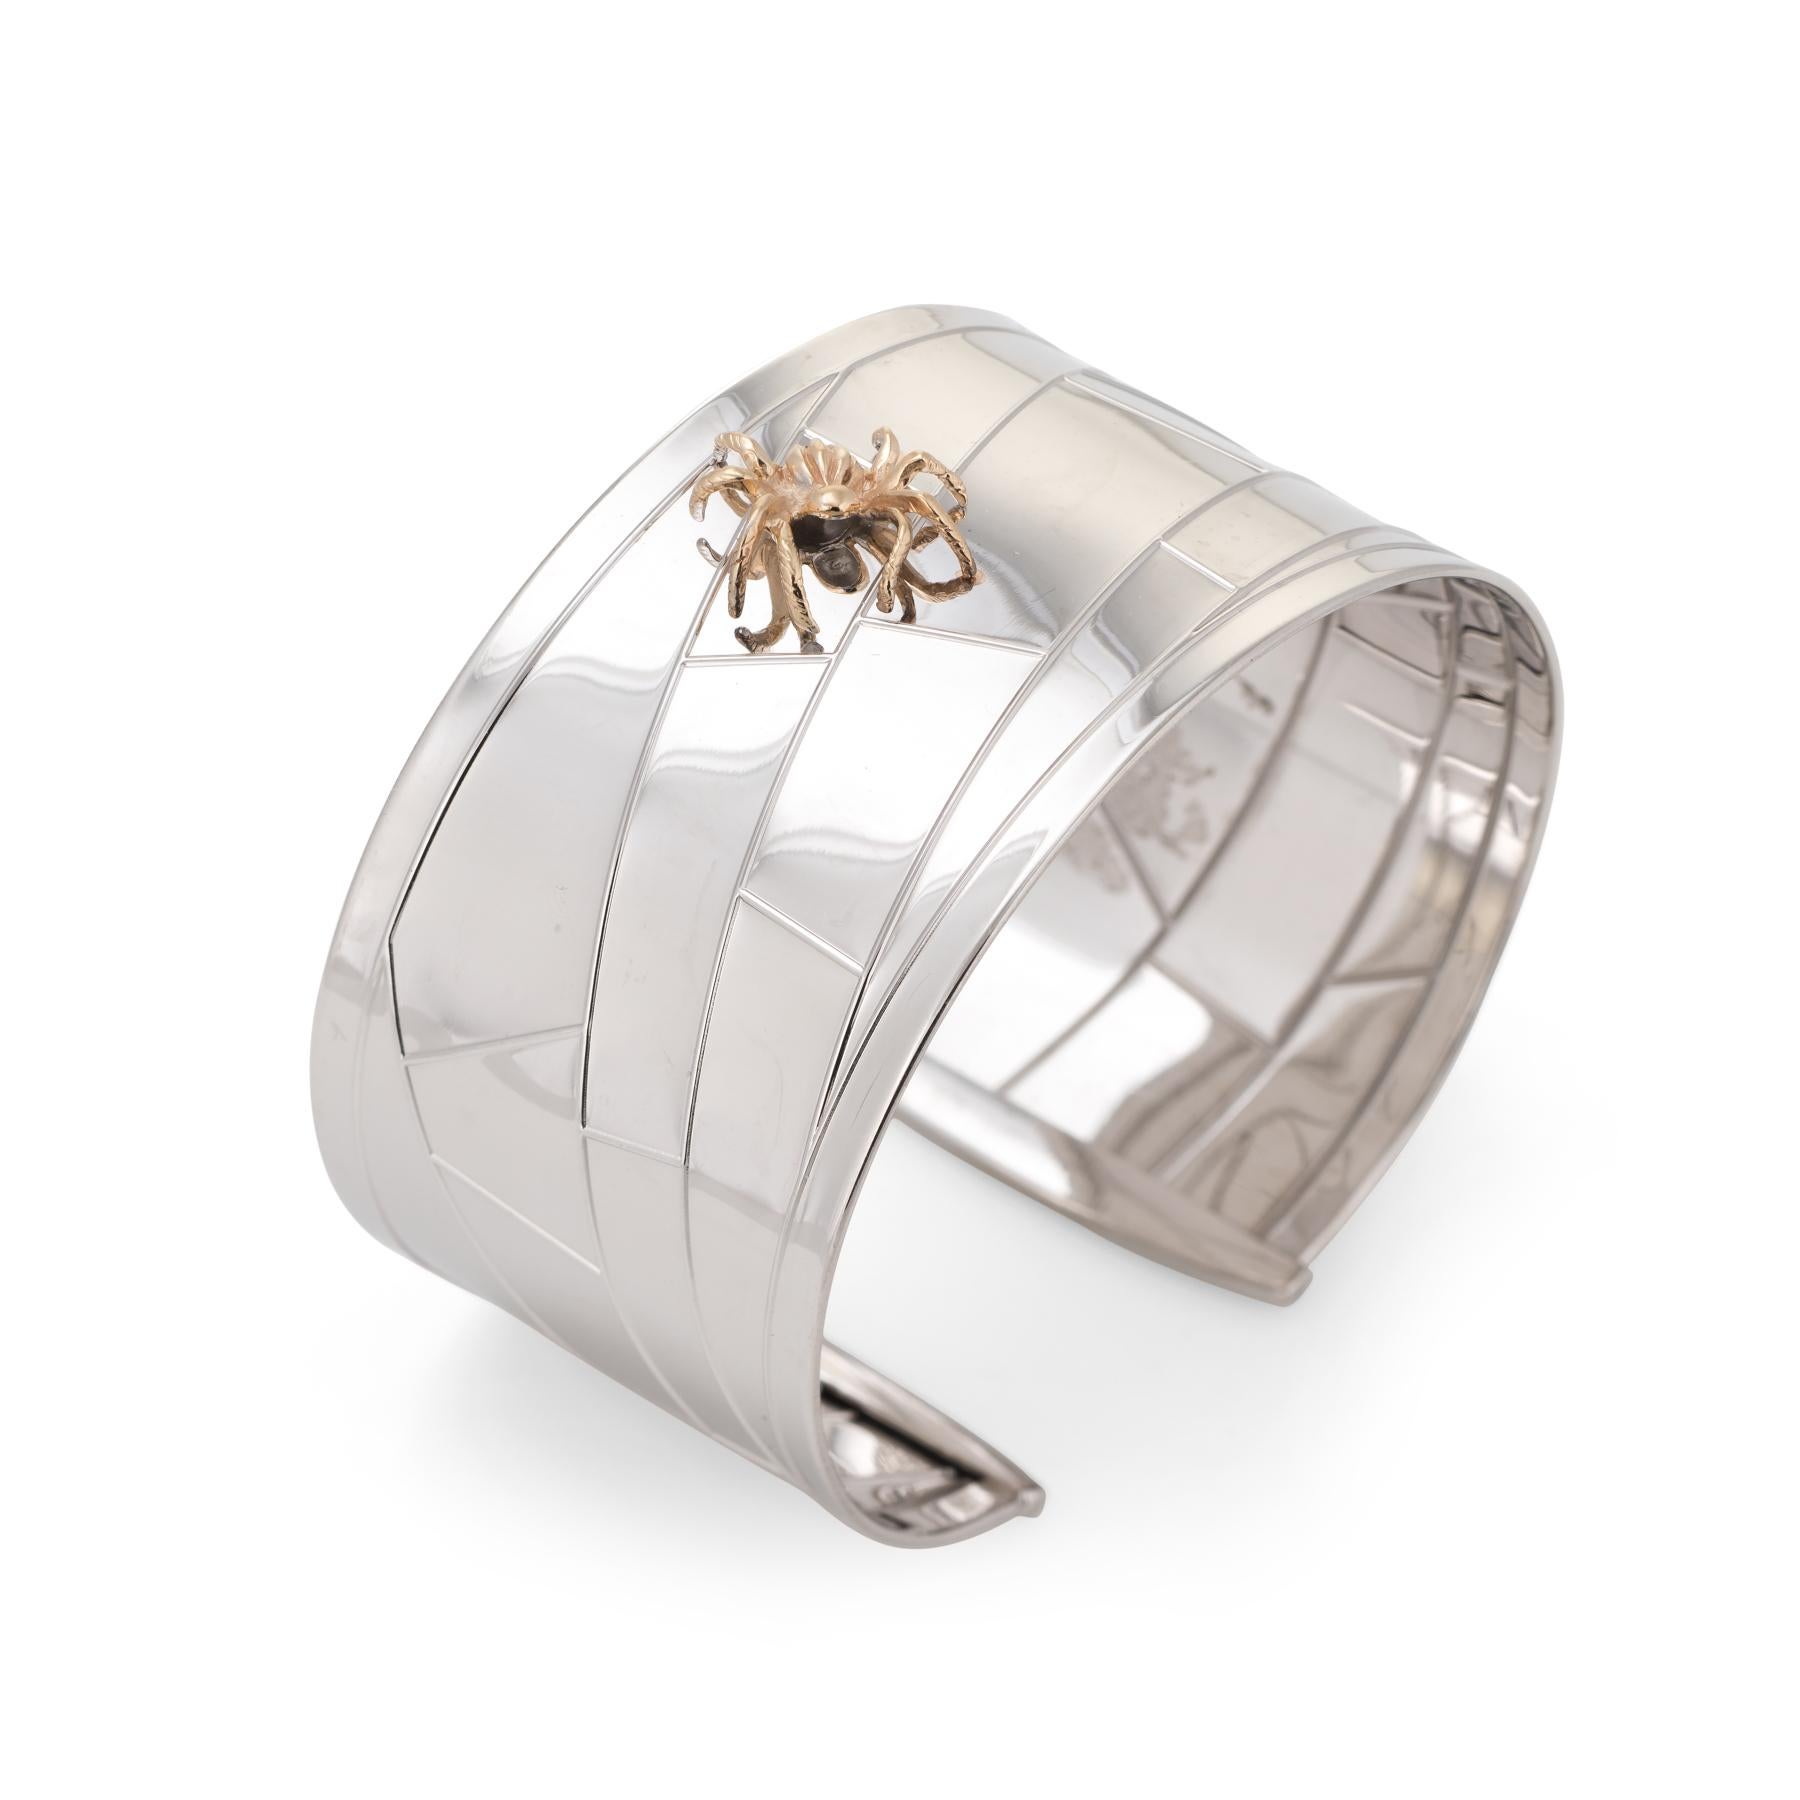 Stylish and finely detailed vintage cuff bracelet, crafted in 14 karat white gold. The spider is 14 karat yellow gold. 

The cuff is constructed in 14 karat white gold with a structured linear design to mimic a spiders web. The eight legged spider